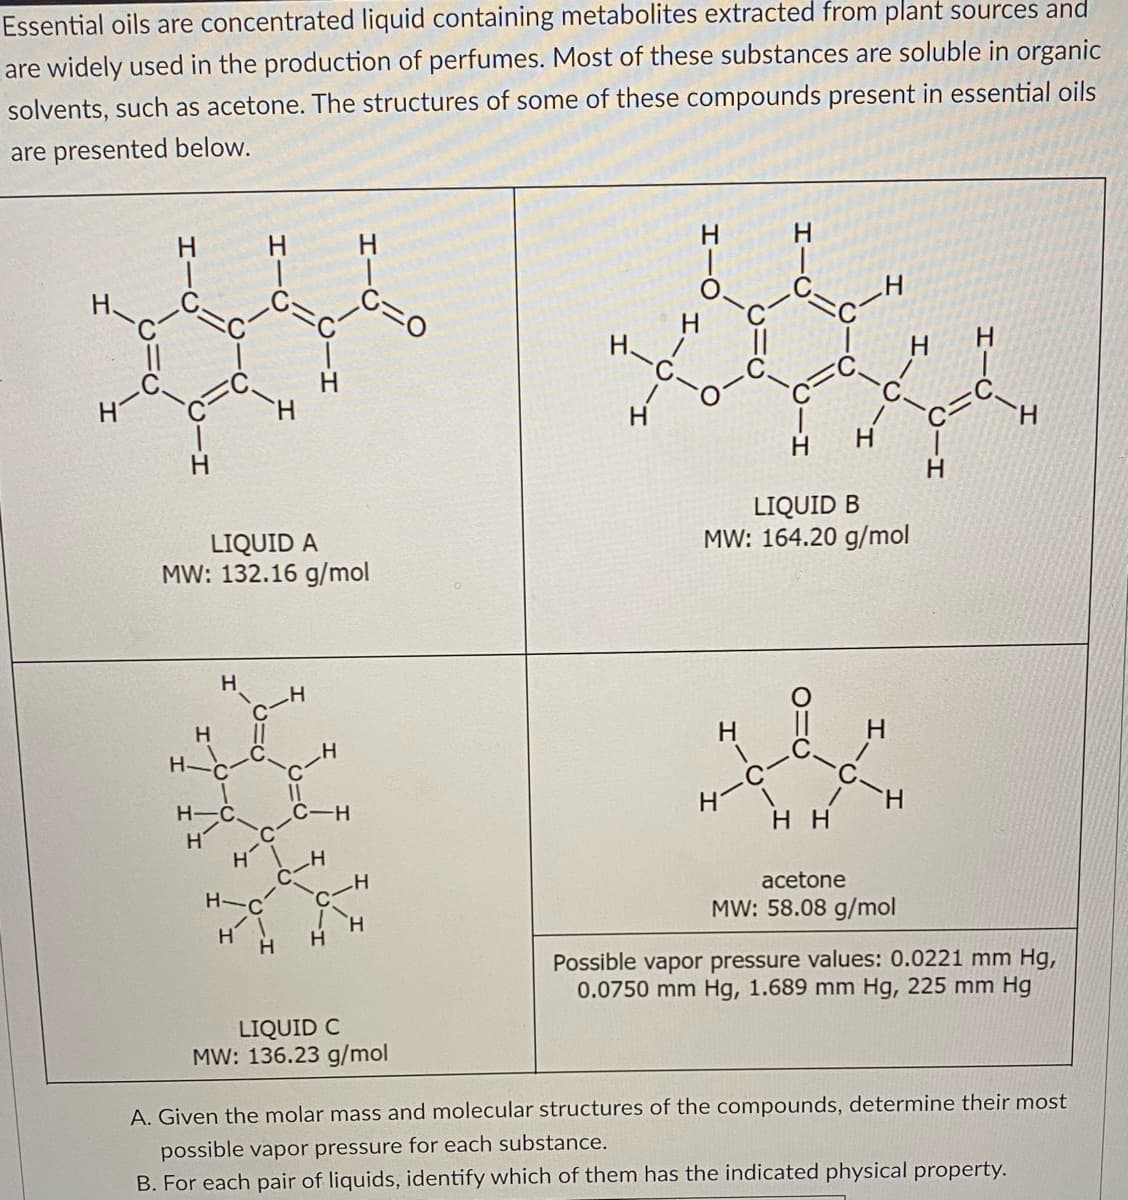 Essential oils are concentrated liquid containing metabolites extracted from plant sources and
are widely used in the production of perfumes. Most of these substances are soluble in organic
solvents, such as acetone. The structures of some of these compounds present in essential oils
are presented below.
نلود
H
LIQUID A
MW: 132.16 g/mol
H
Н'
H
H
H-
C-
H
-H
H
H
LIQUID C
MW: 136.23 g/mol
H-
H
H
H-
LIQUID B
MW: 164.20 g/mol
H
HH
H
acetone
MW: 58.08 g/mol
H
Possible vapor pressure values: 0.0221 mm Hg,
0.0750 mm Hg, 1.689 mm Hg, 225 mm Hg
A. Given the molar mass and molecular structures of the compounds, determine their most
possible vapor pressure for each substance.
B. For each pair of liquids, identify which of them has the indicated physical property.